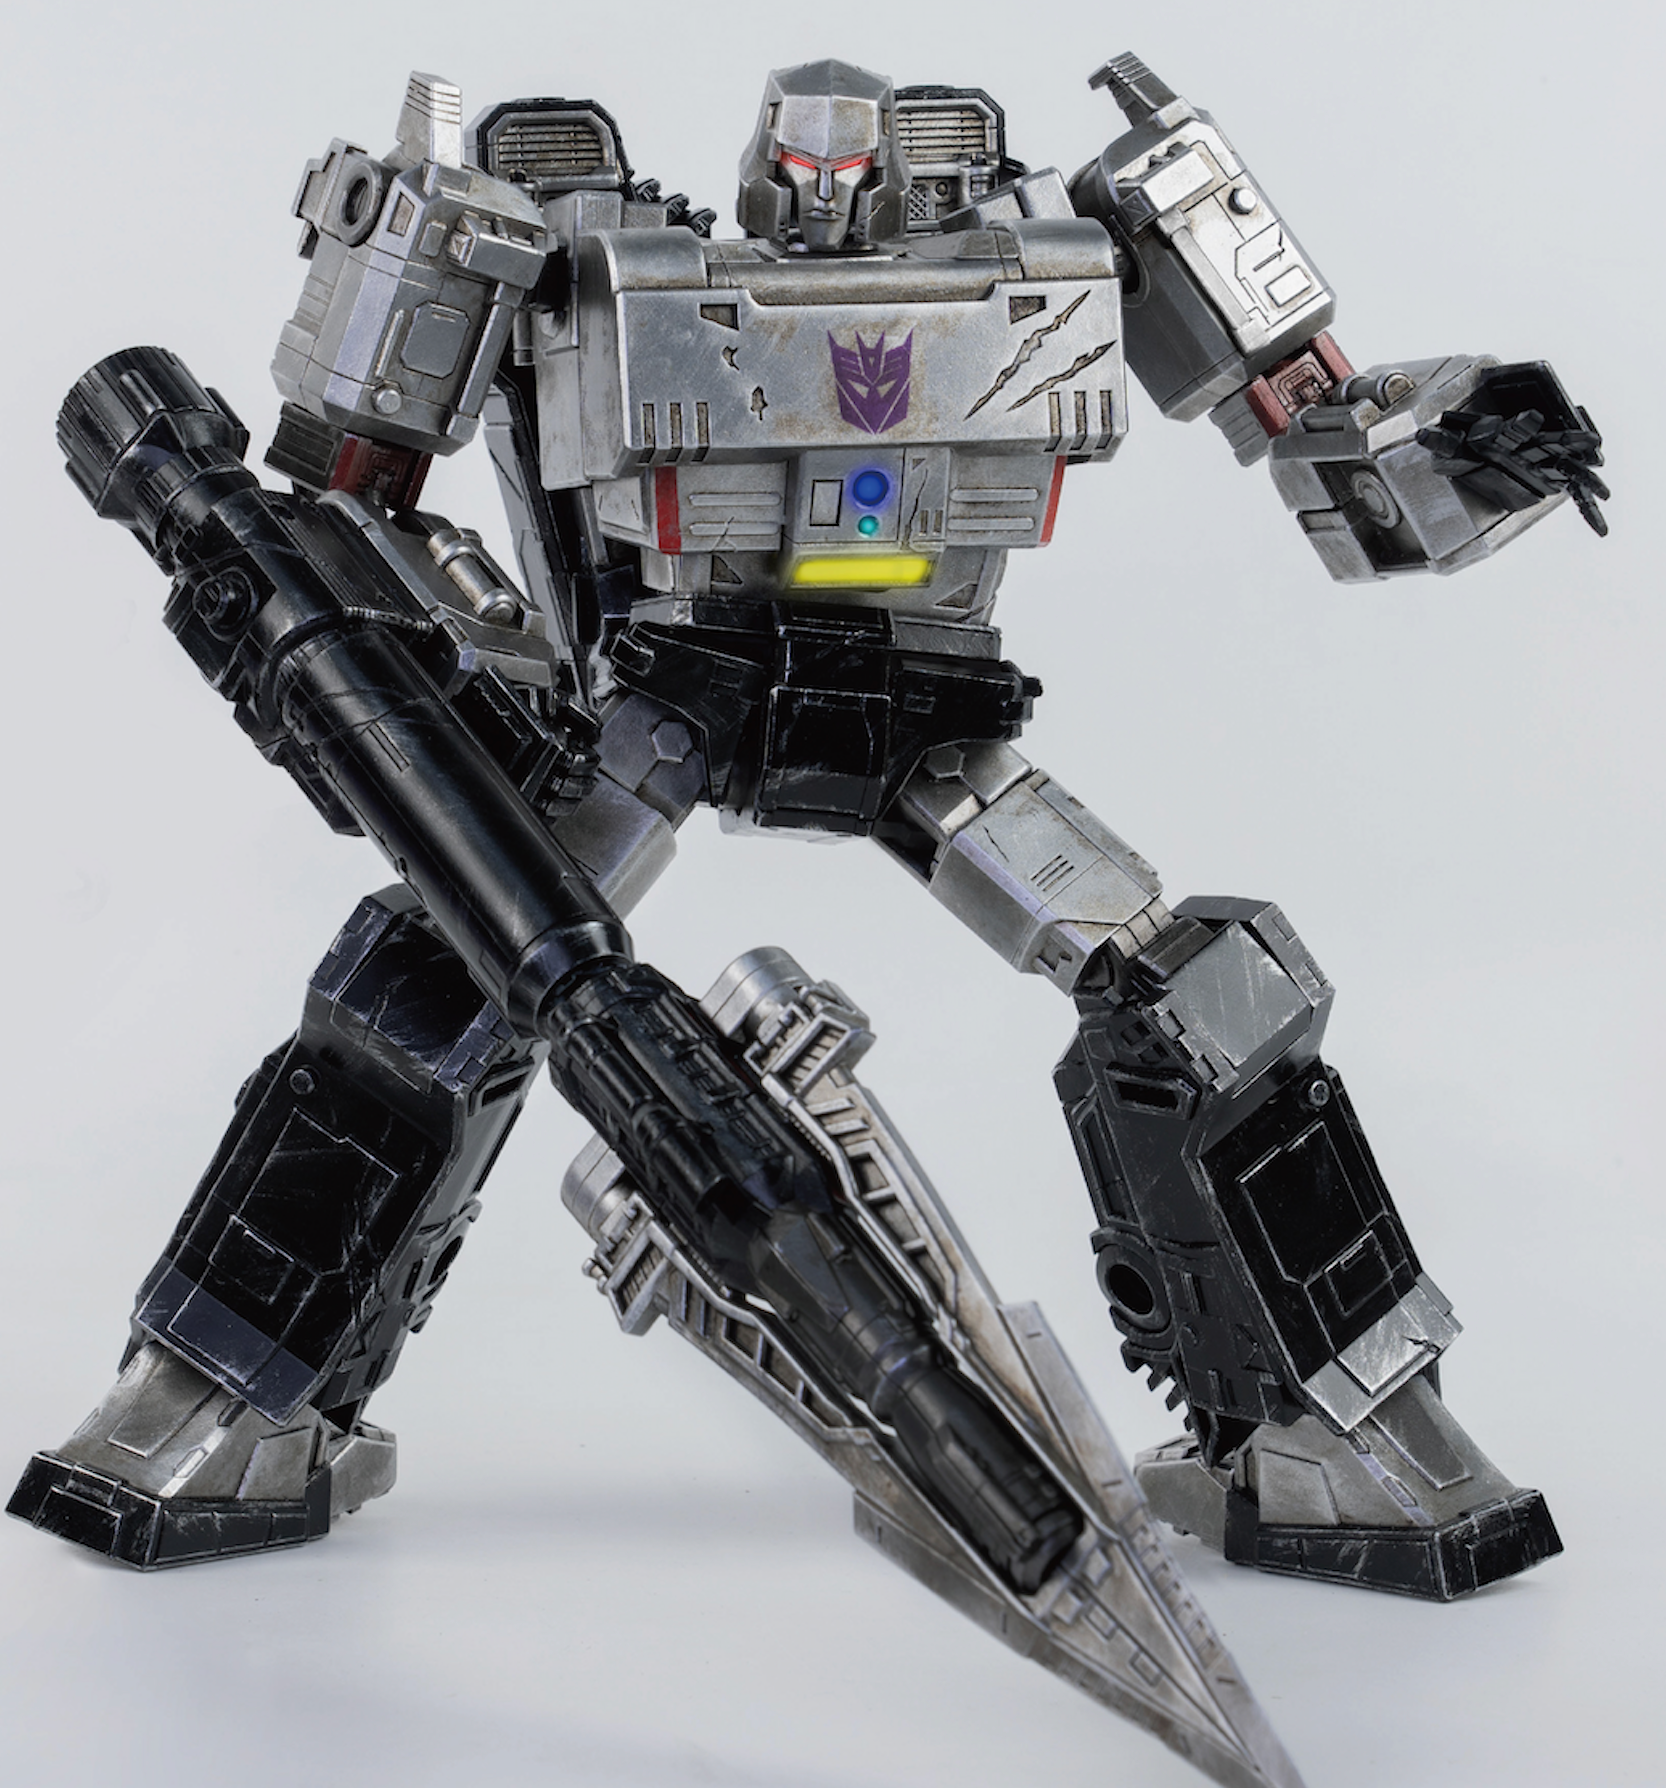 Transformers: War For Cybertron Trilogy DLX Megatron 10 inch action figure by ThreeZero Available Now ! ! !